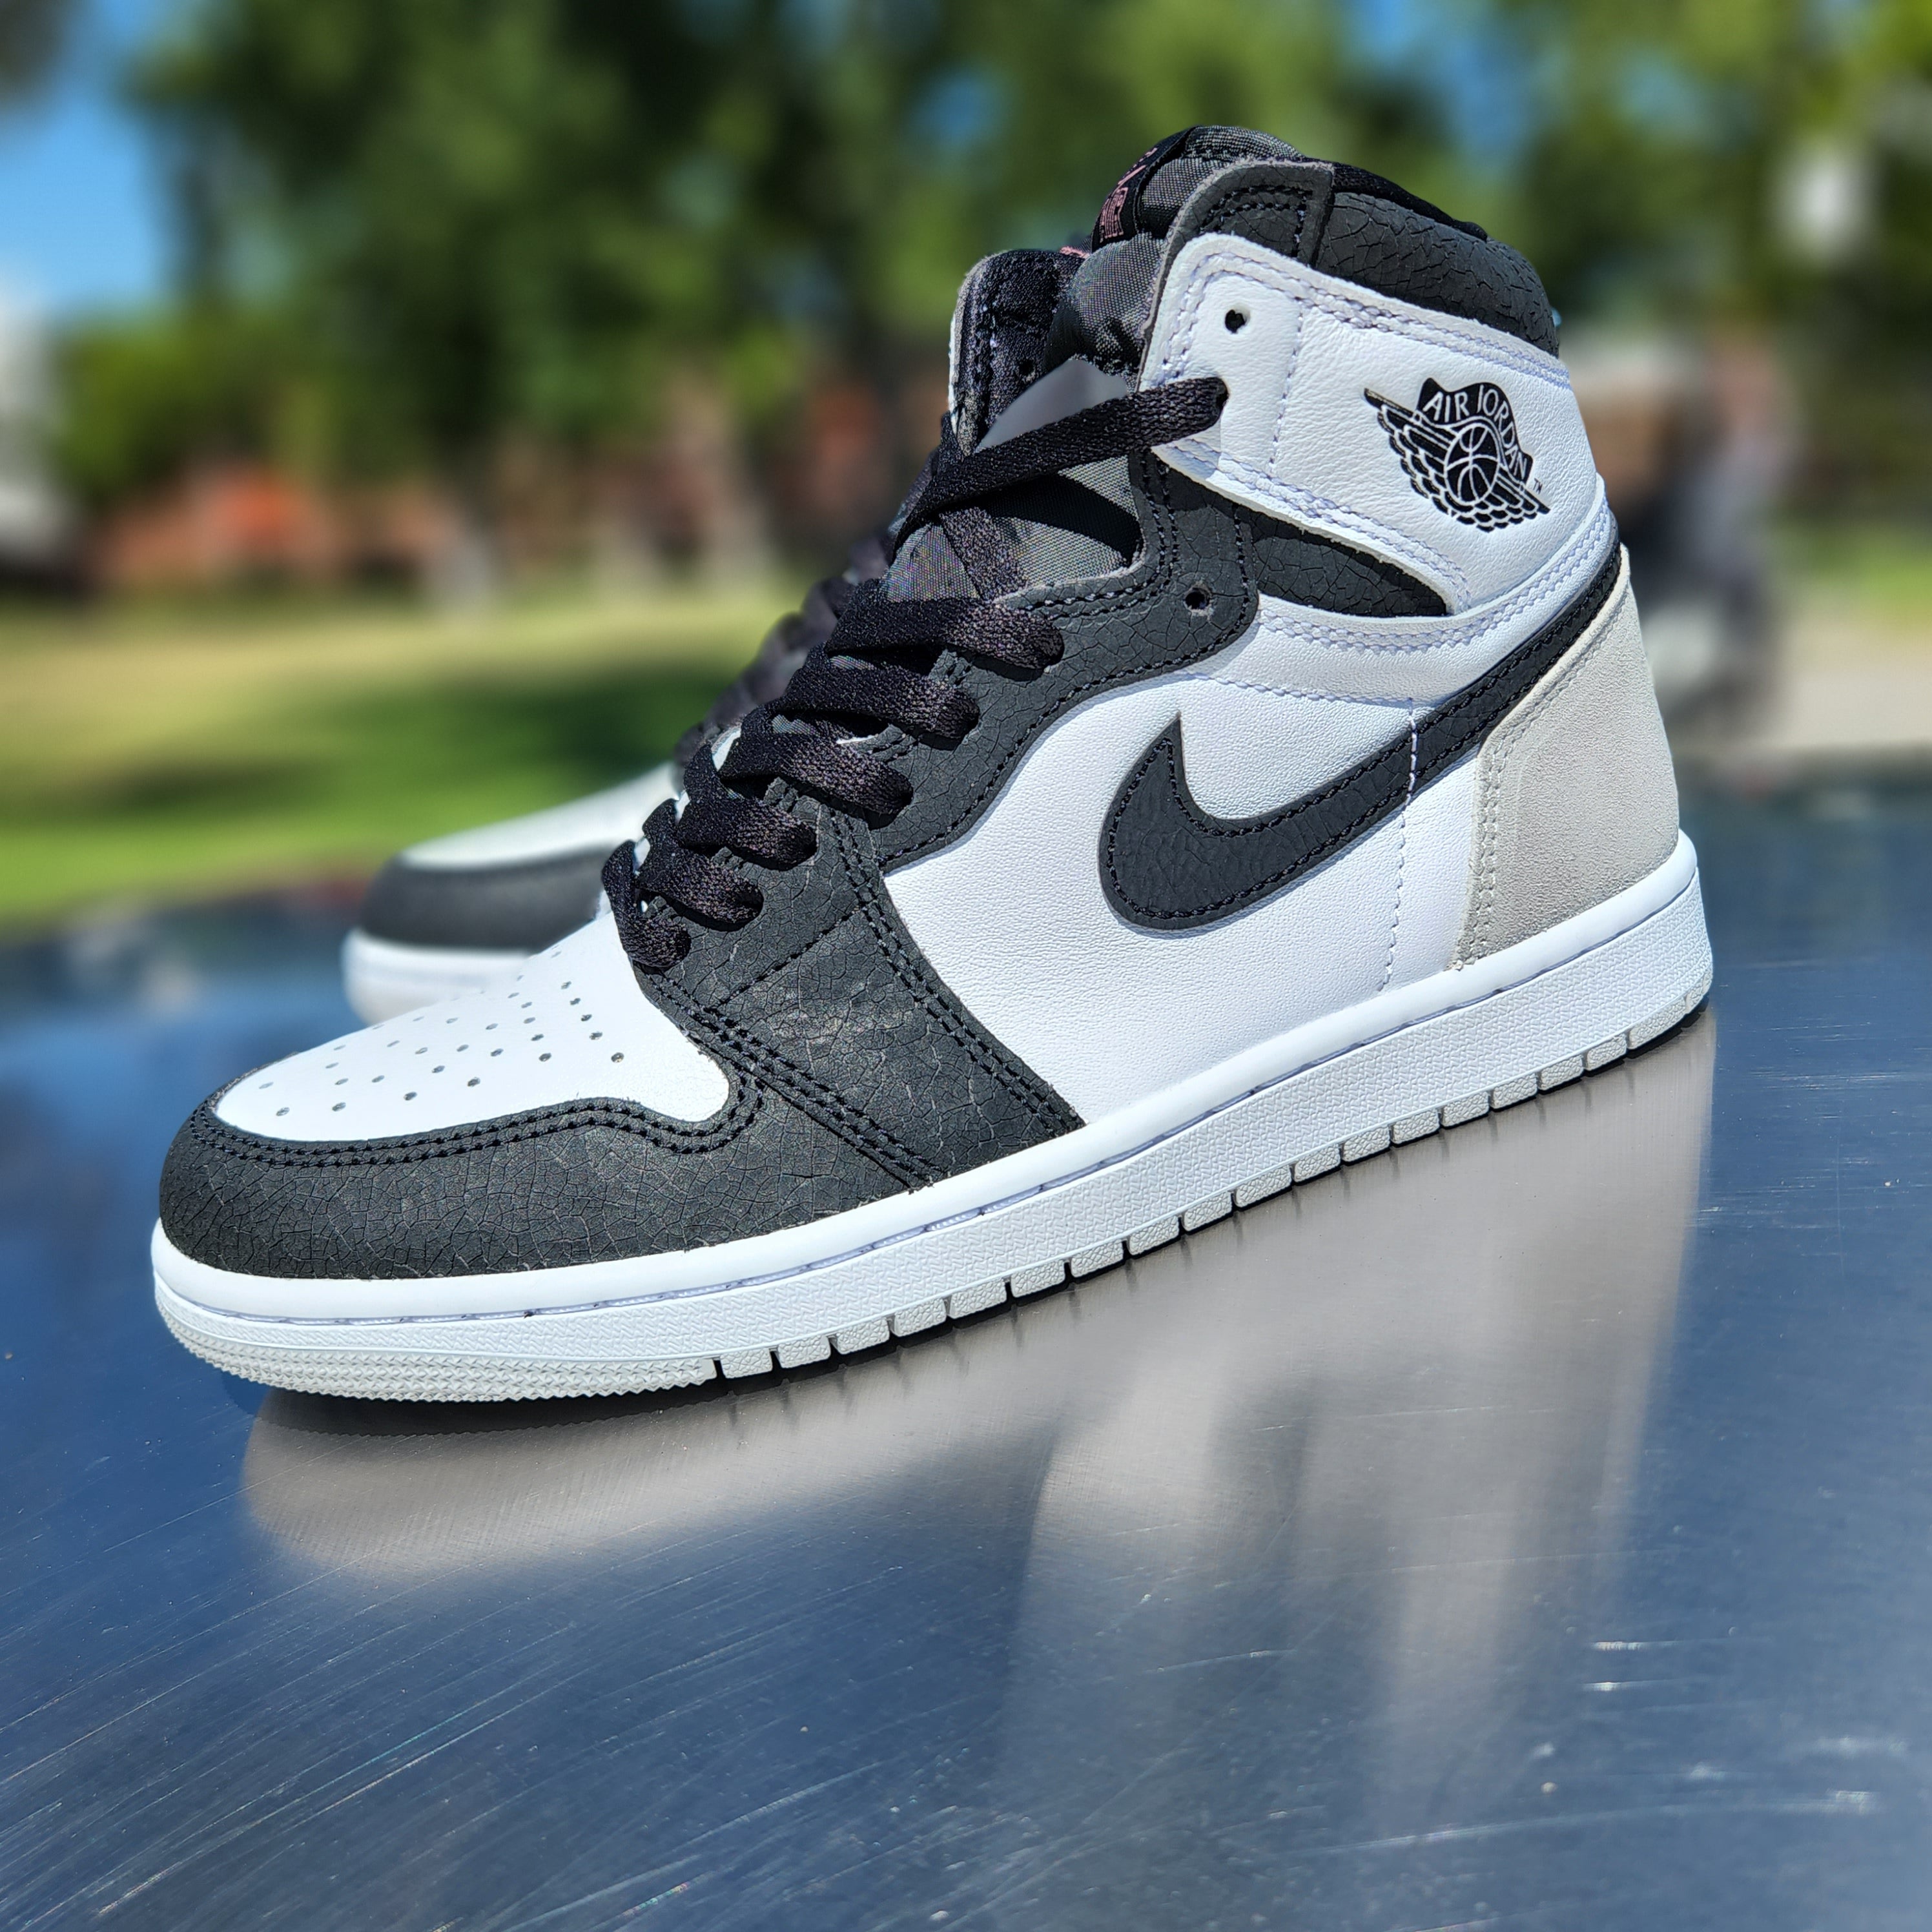 Air Jordan 1 Retro High OG Stage Haze Release Date – PRIVATE SNEAKERS